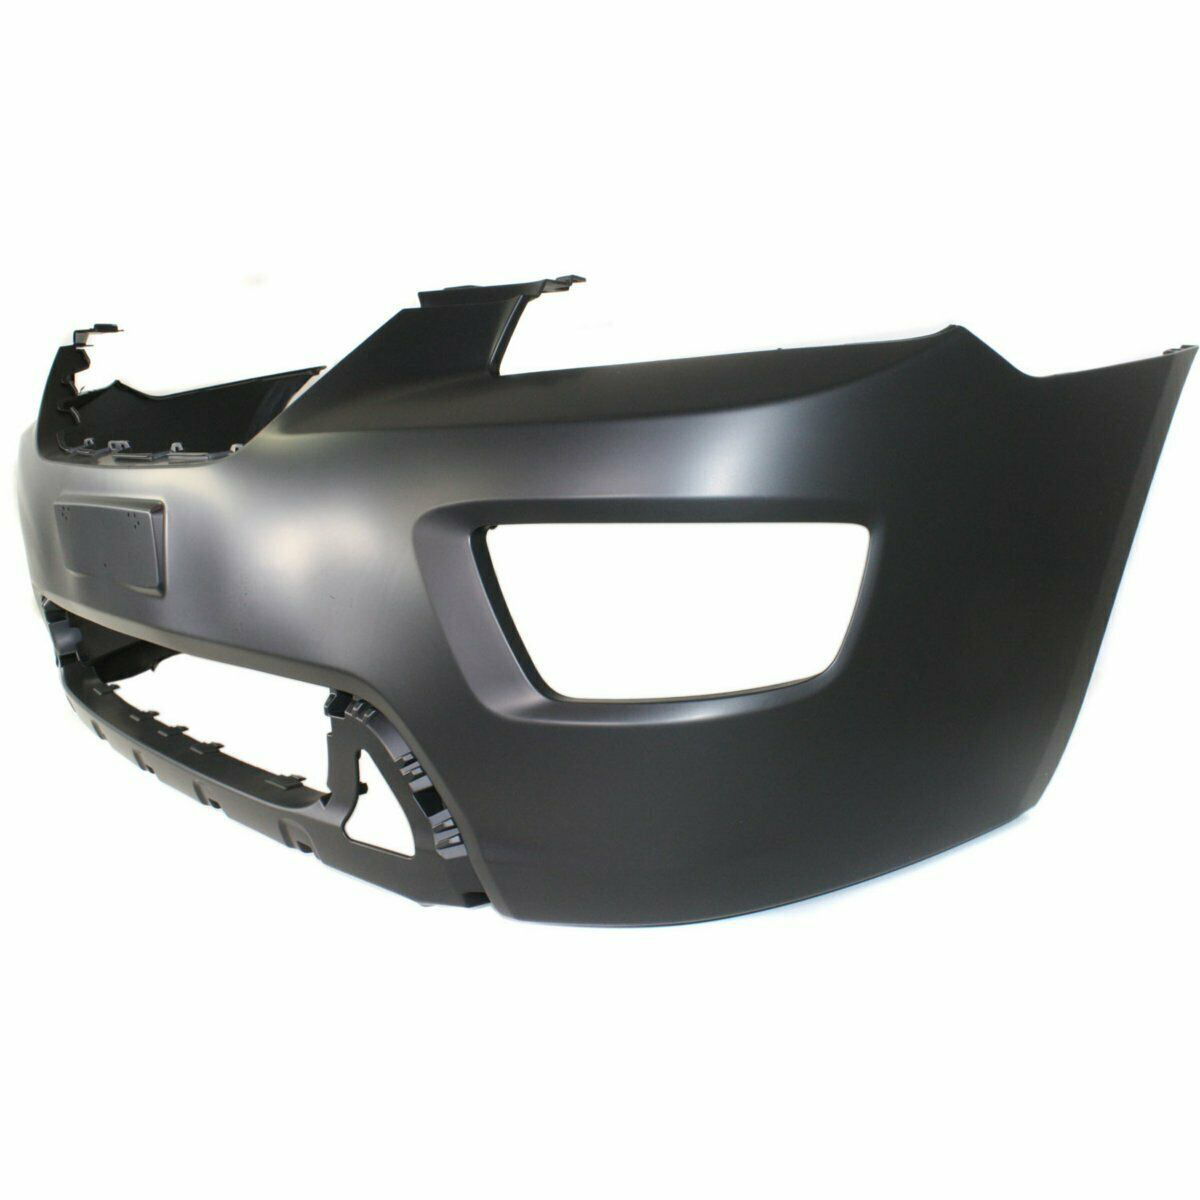 2007-2012 Kia Rondo Front Bumper Painted to Match